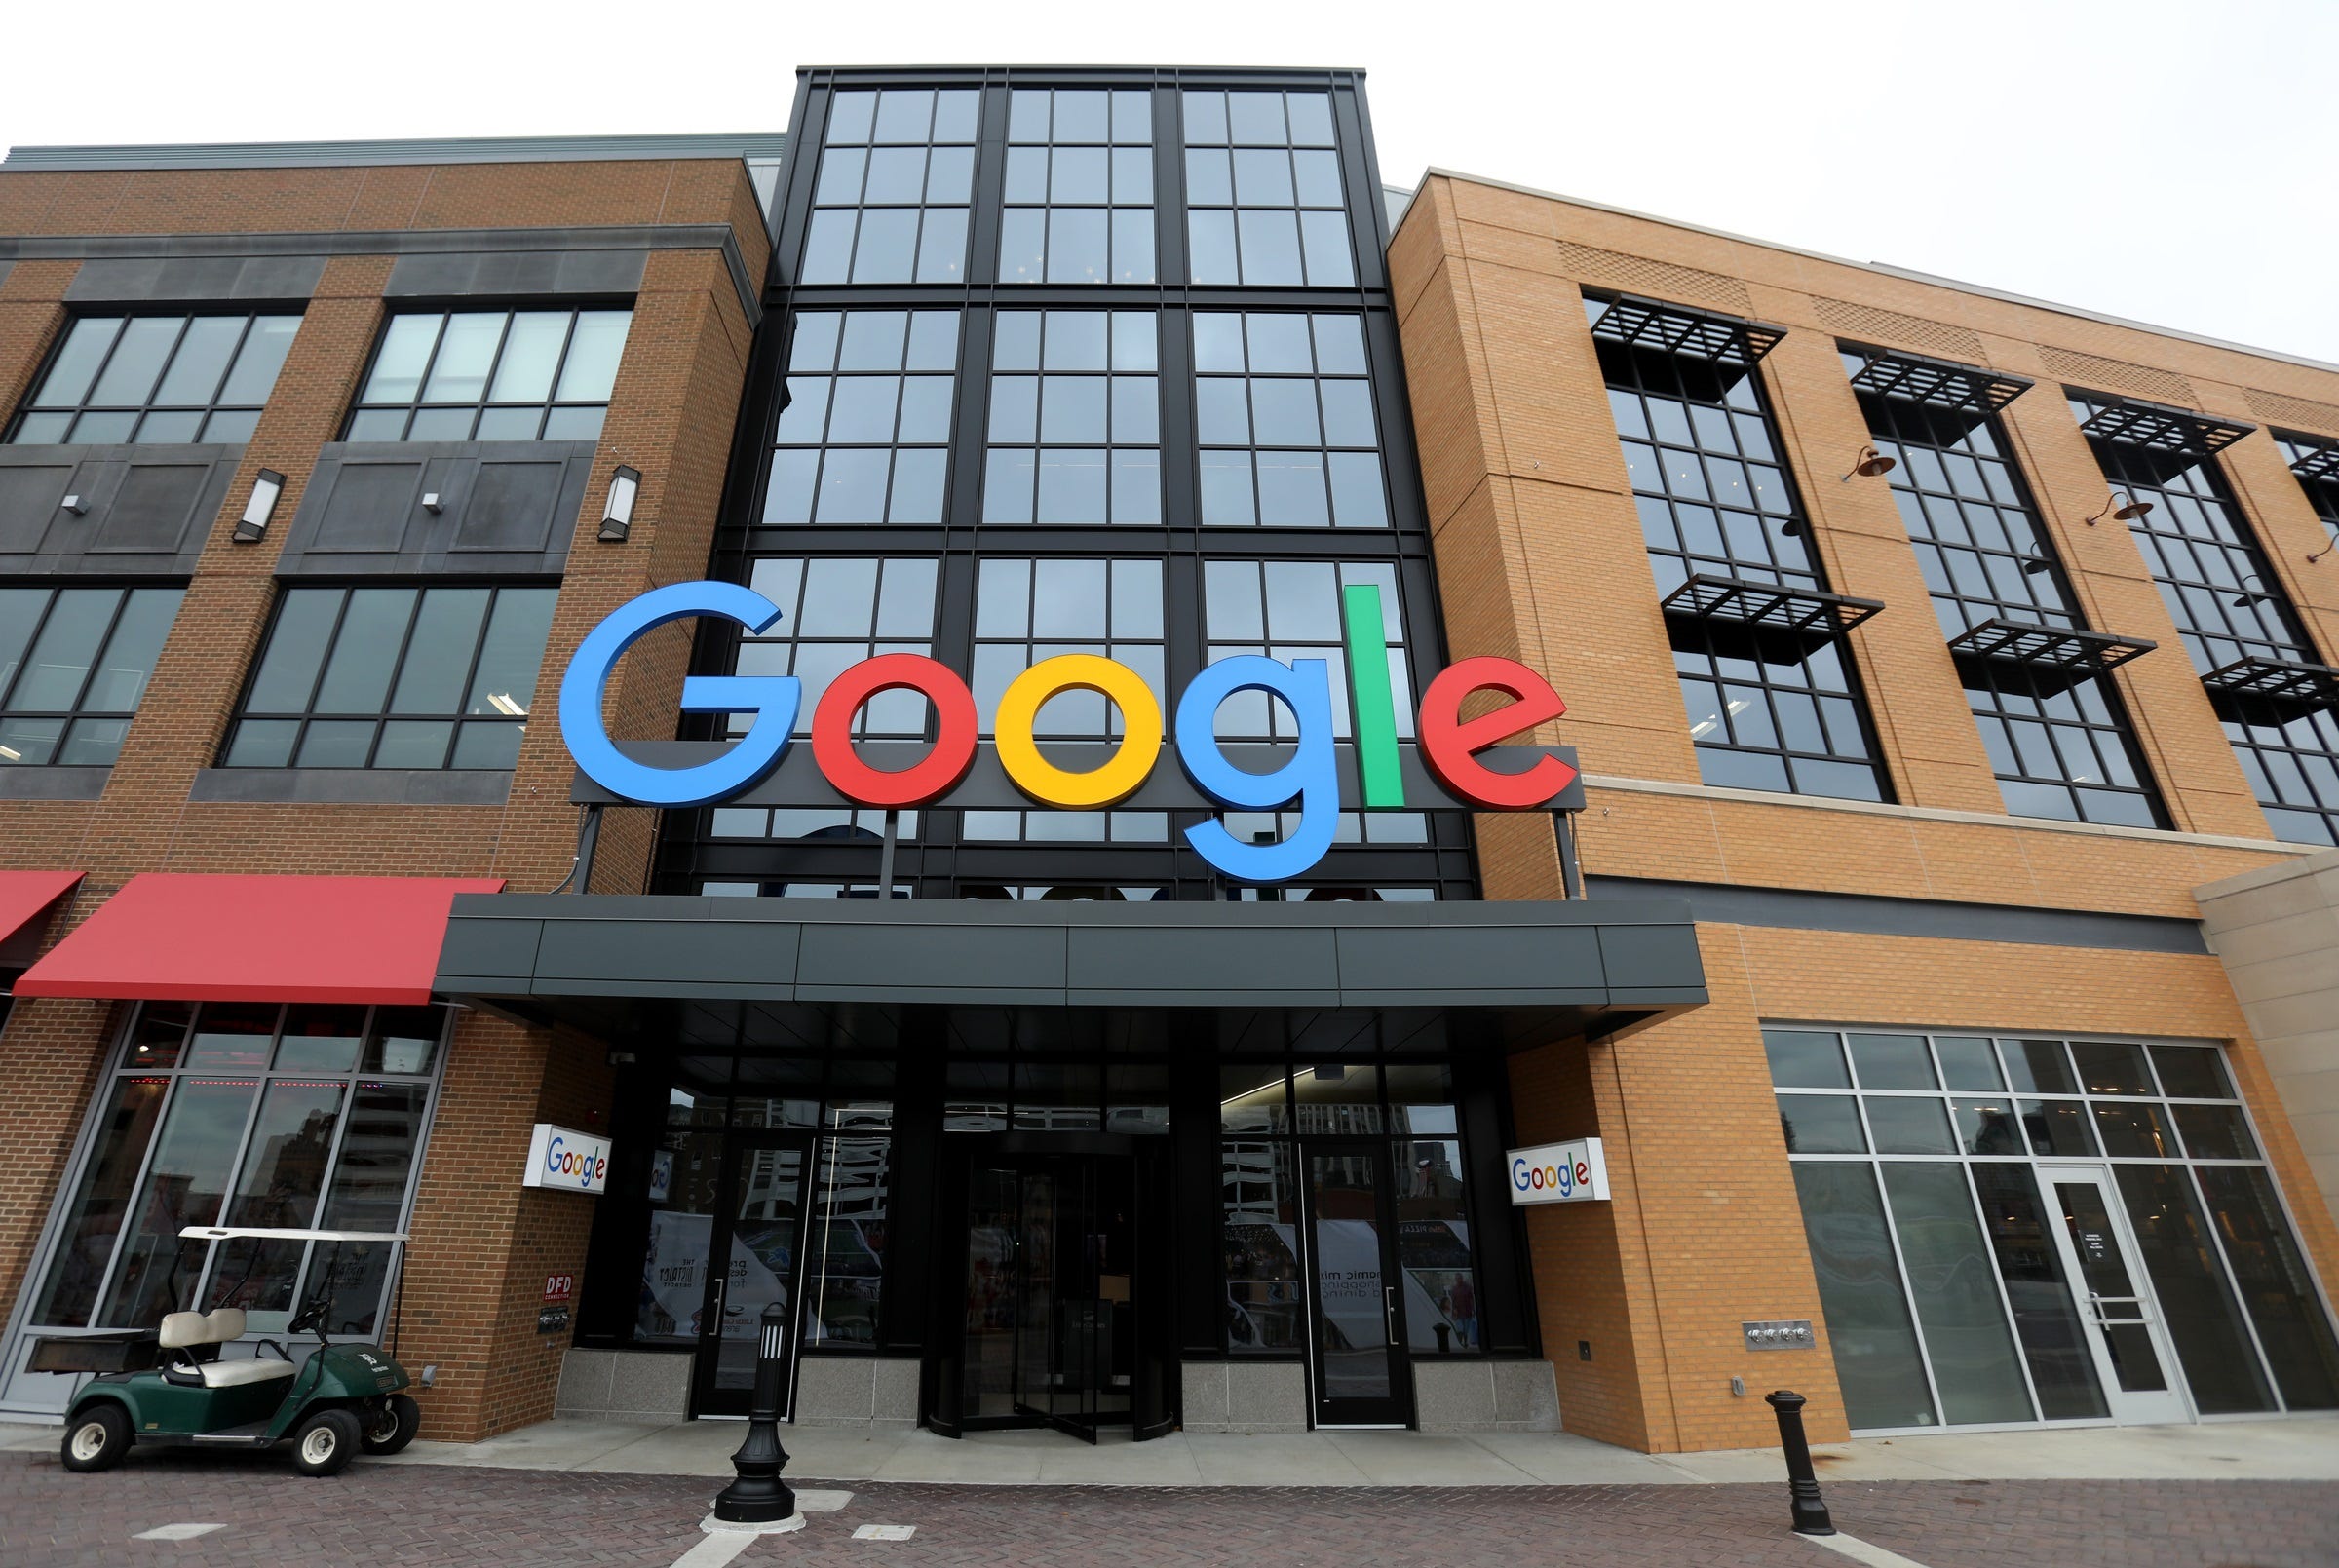 Google to expand in Michigan, add jobs in Detroit and Ann Arbor